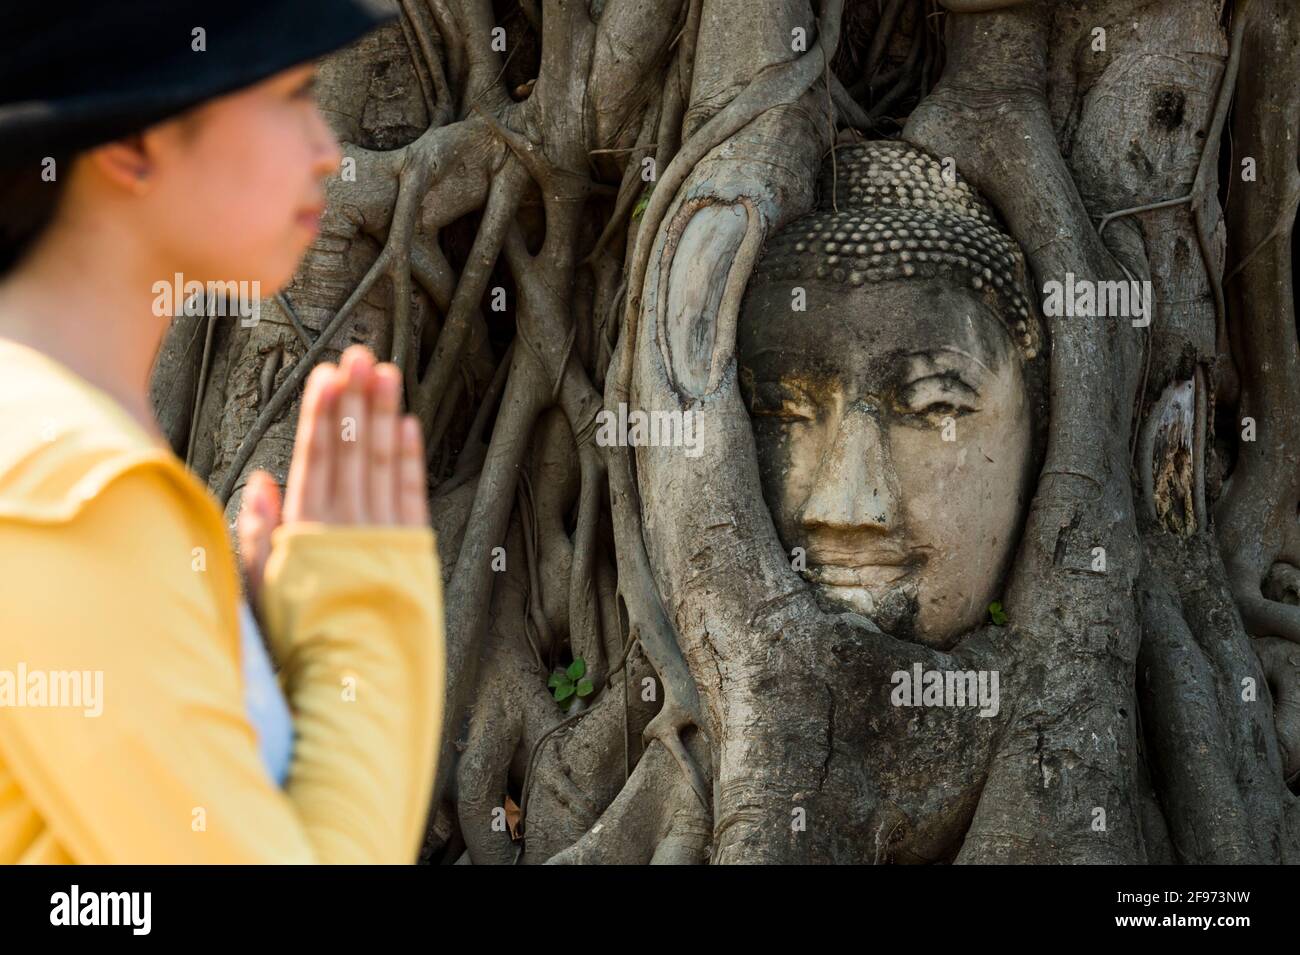 Ayutthaya, Wat Mahathat Temple, According to the Buddha, trust and confidence are the basis of right contemplation Stock Photo